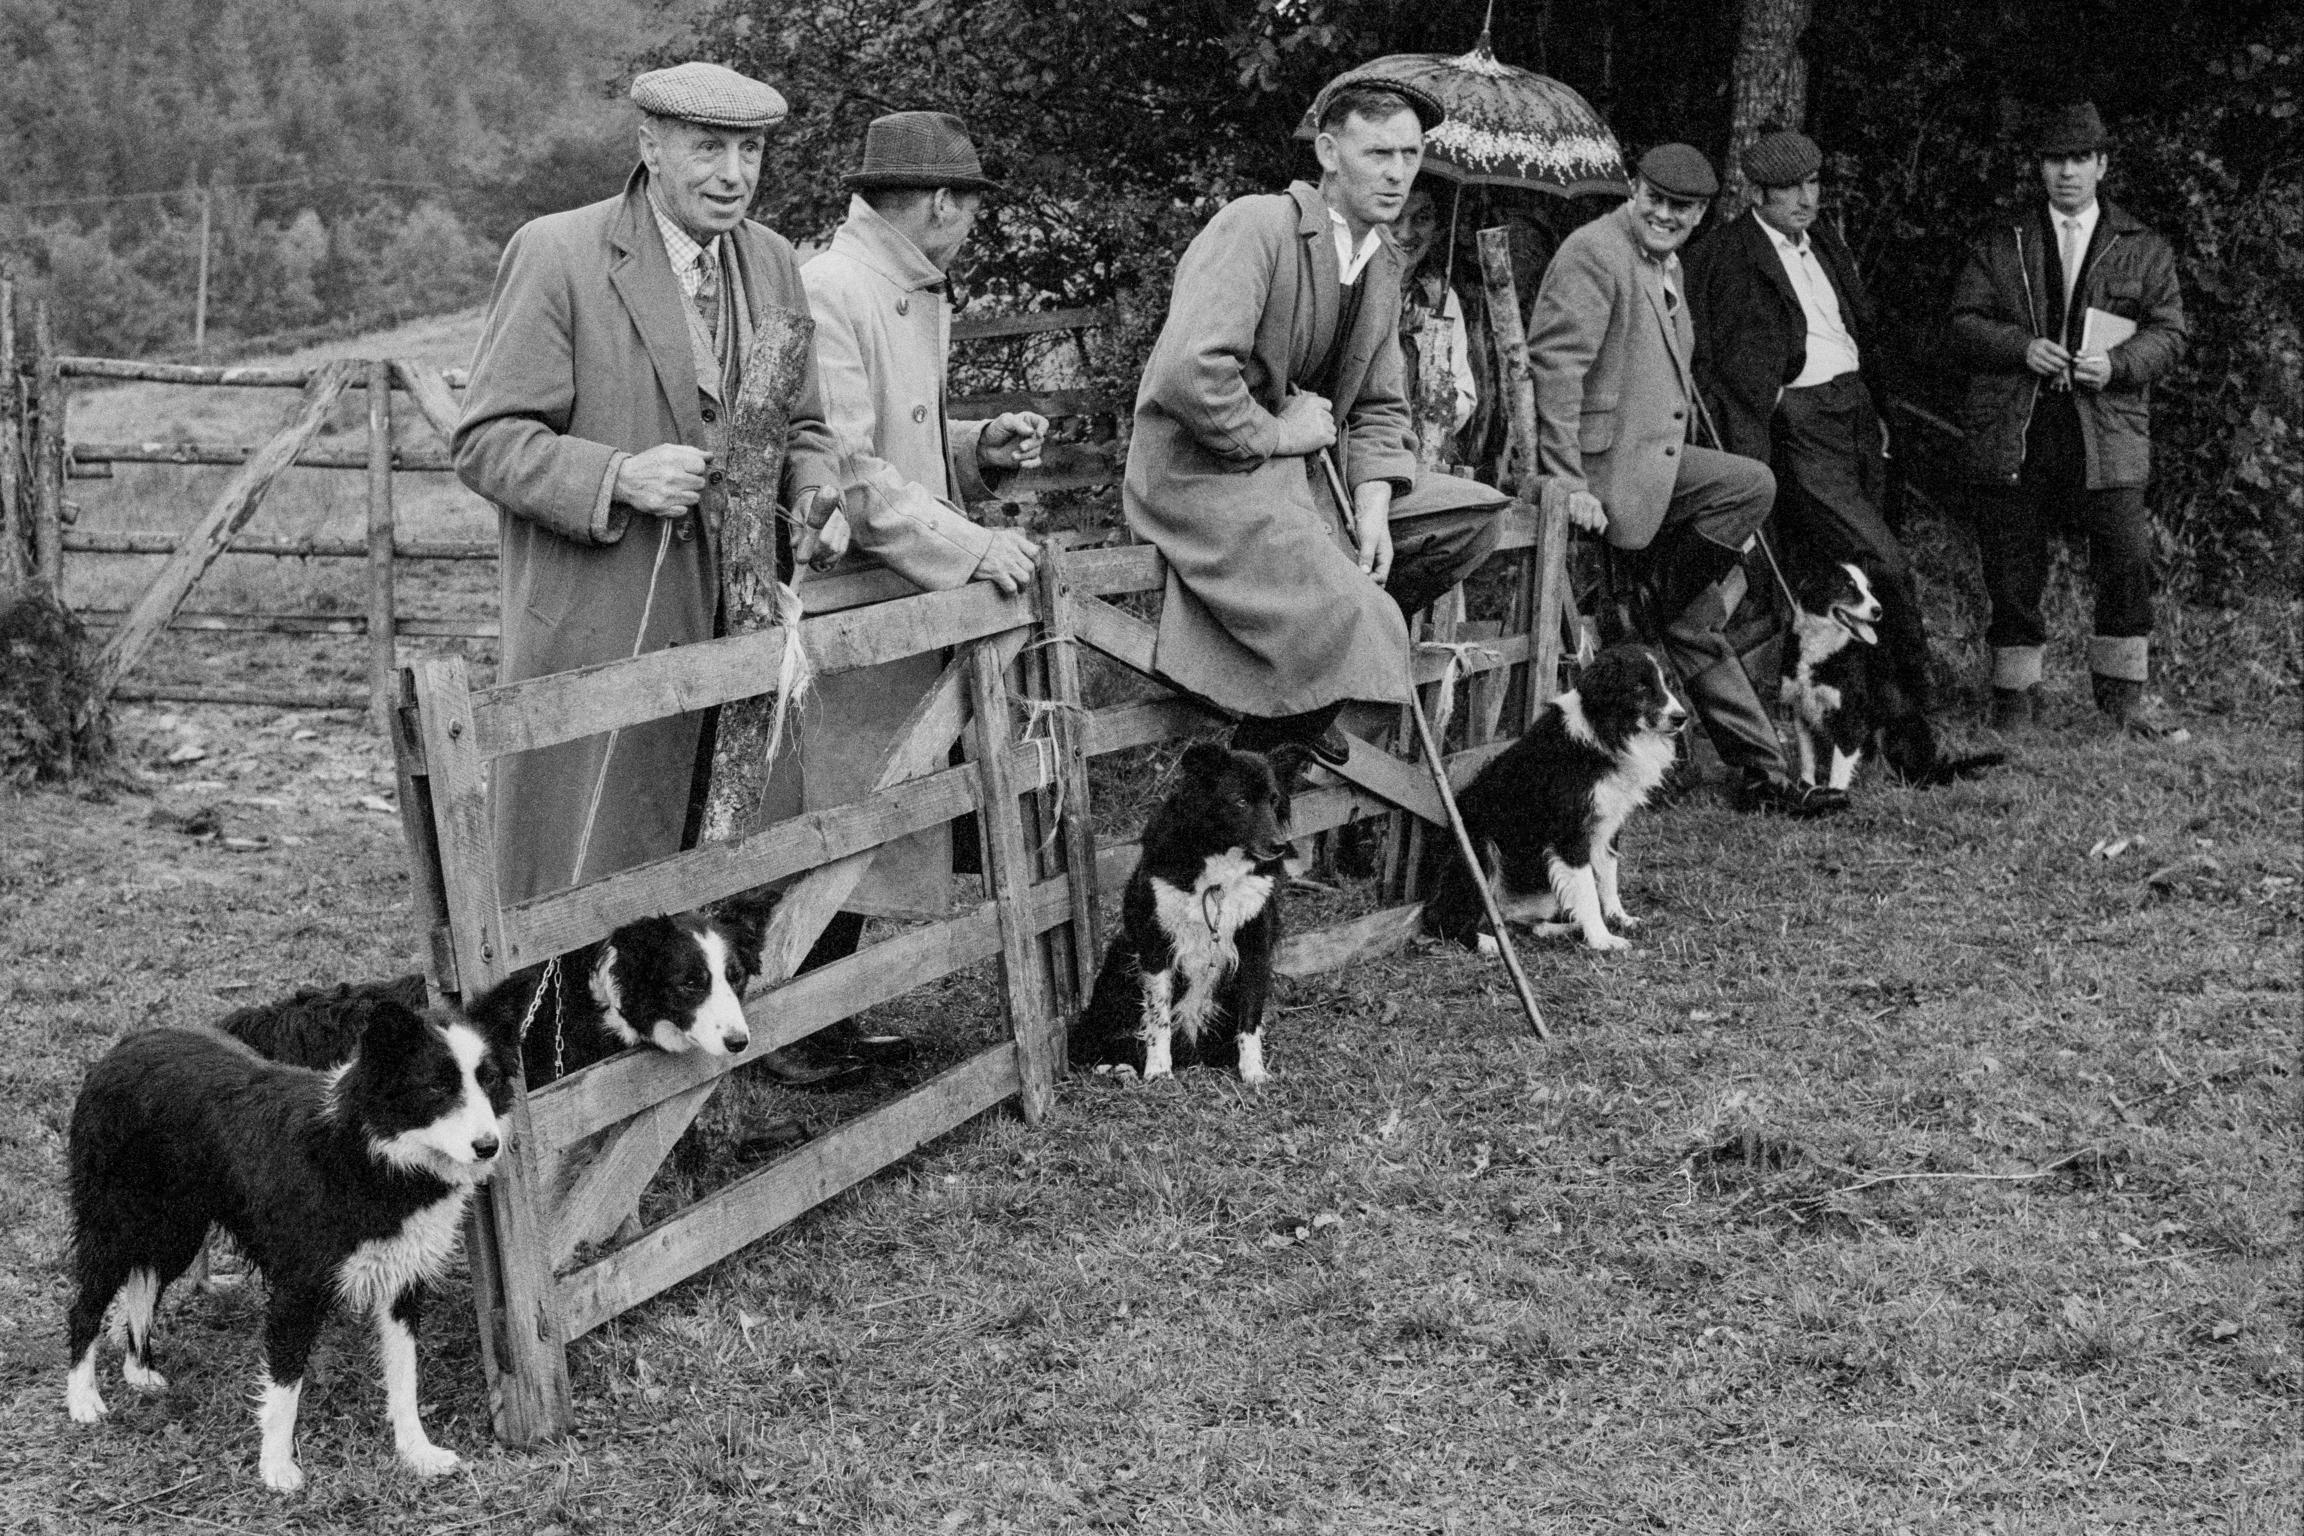 Sheepdog trials. Farmers and their dogs watch with great expertise. Gwernogle, Wales